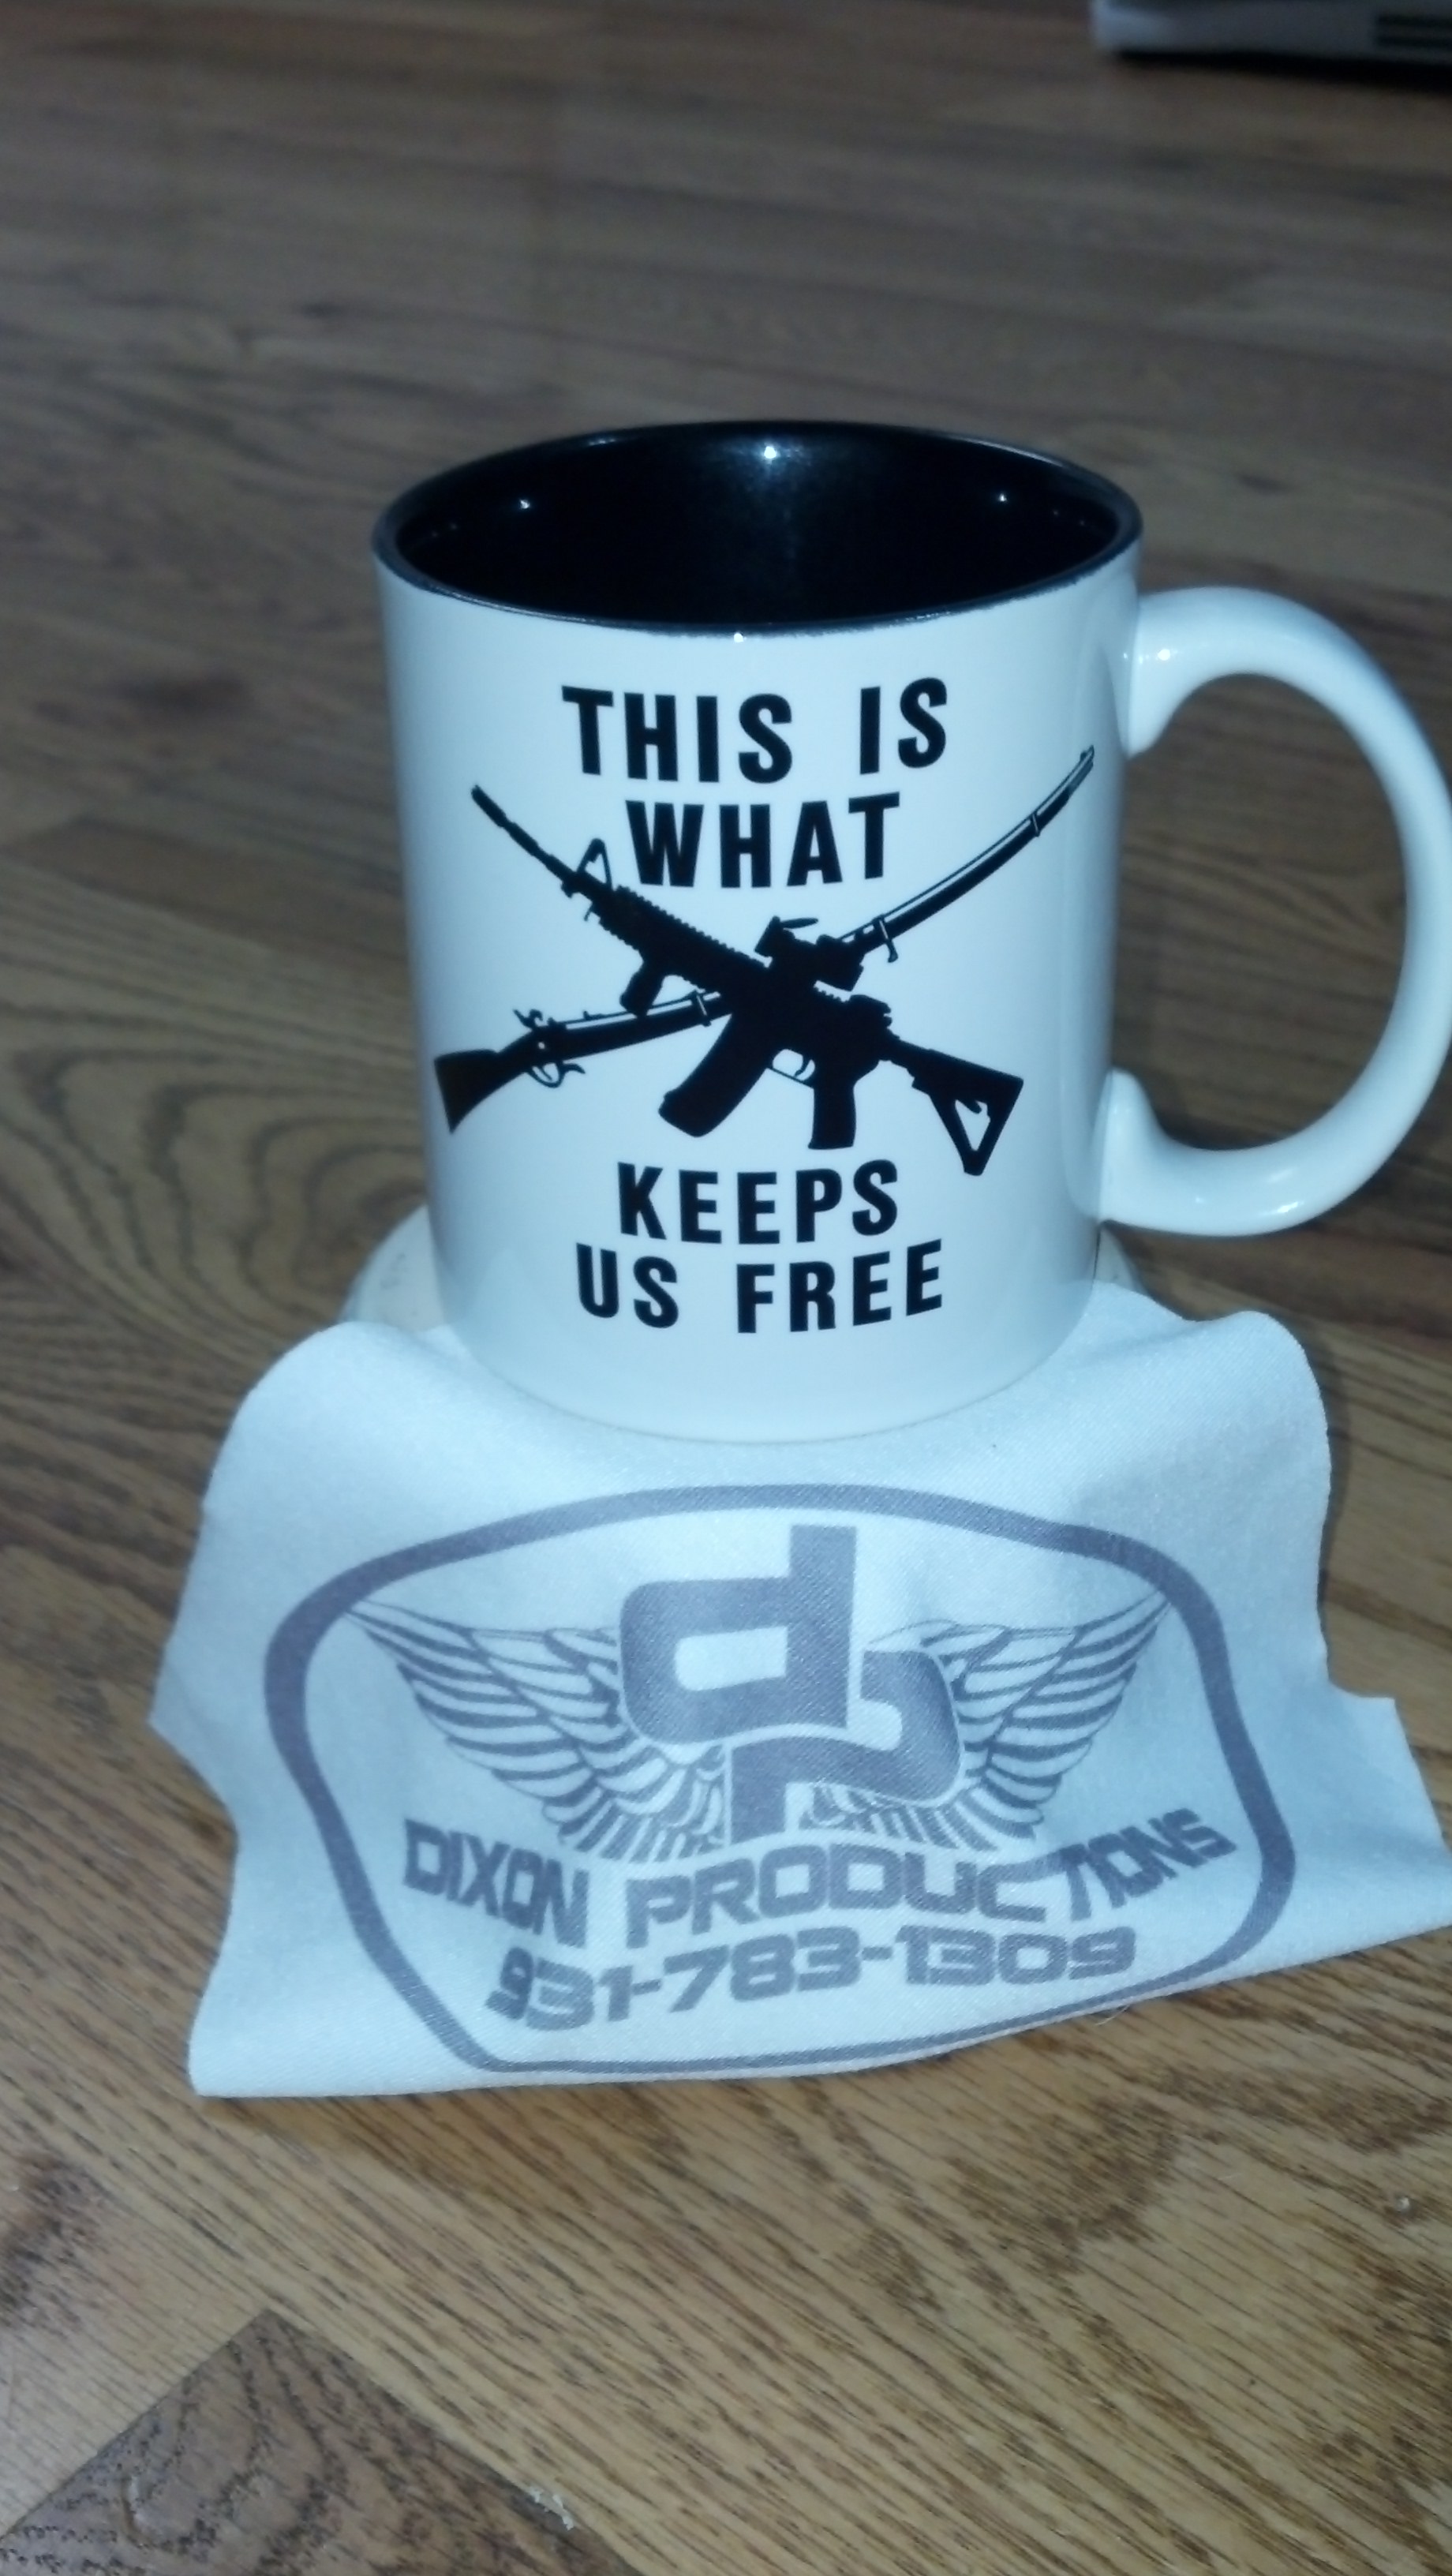 Dixon Productions made with sublimation printing